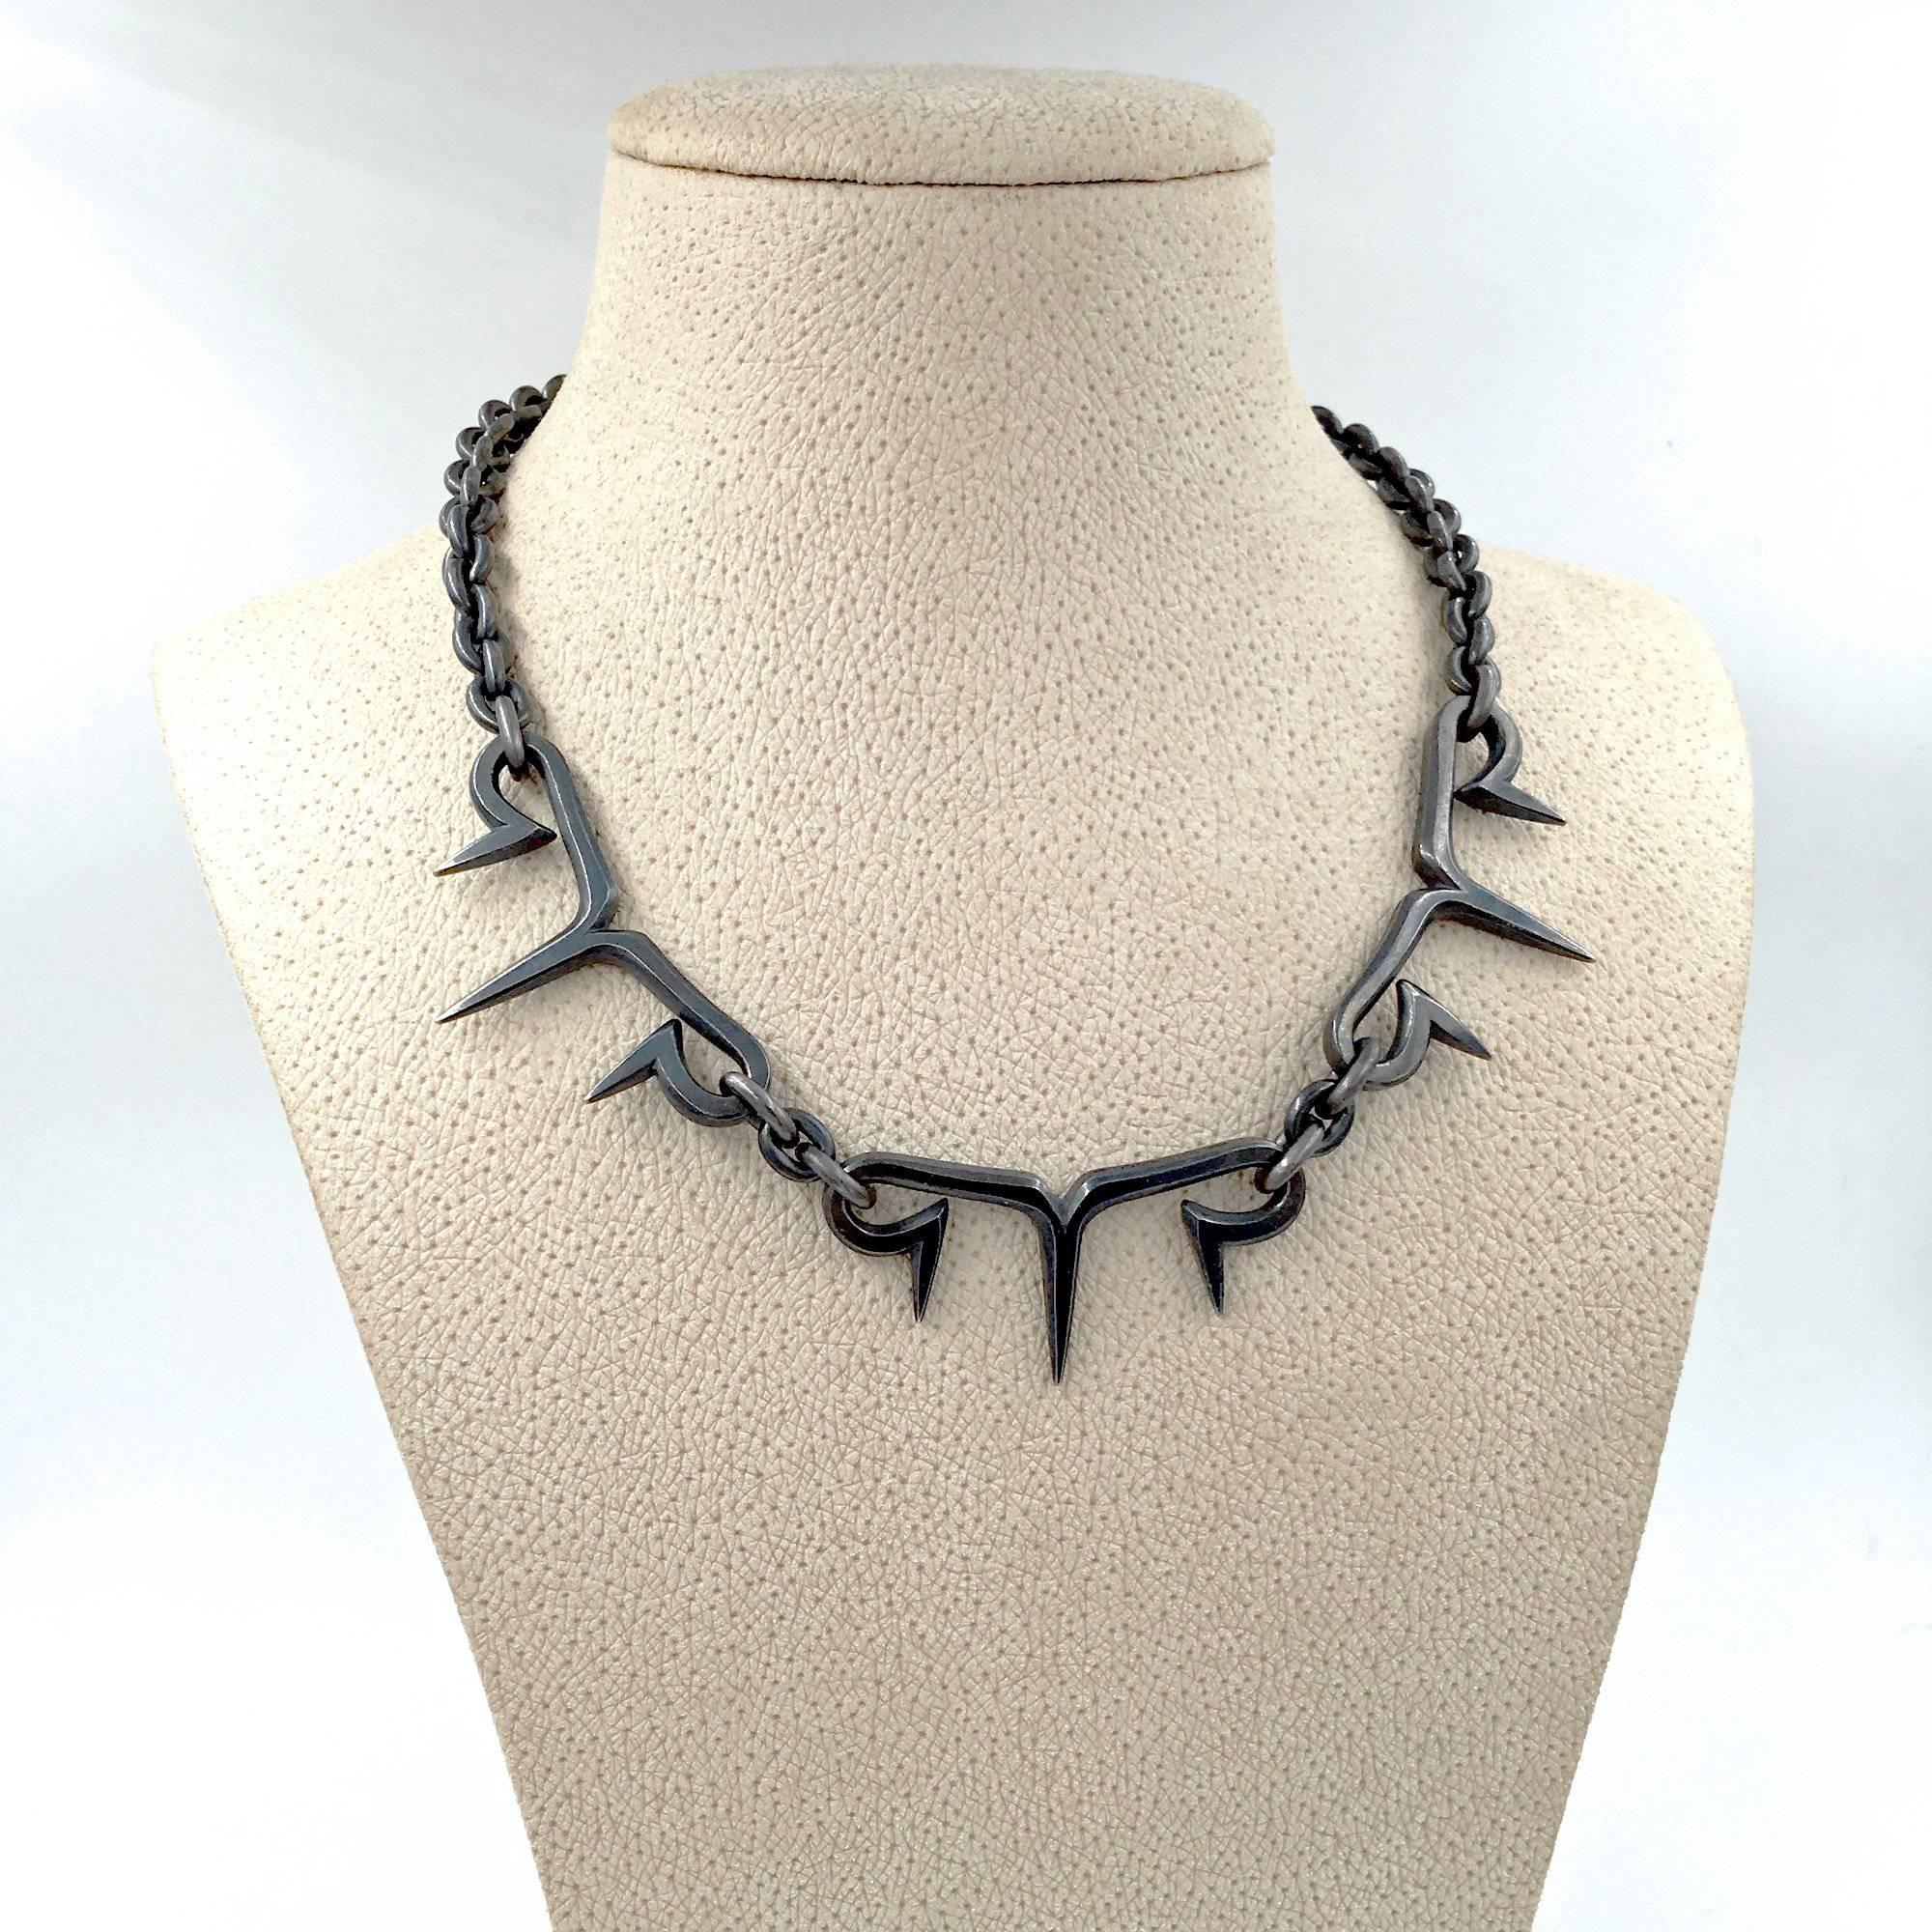 Spike Link Chain Necklace handmade in oxidized sterling silver by renowned jewelry designer and artist Pedro Boregaard. Stamped and hallmarked (see additional images). 